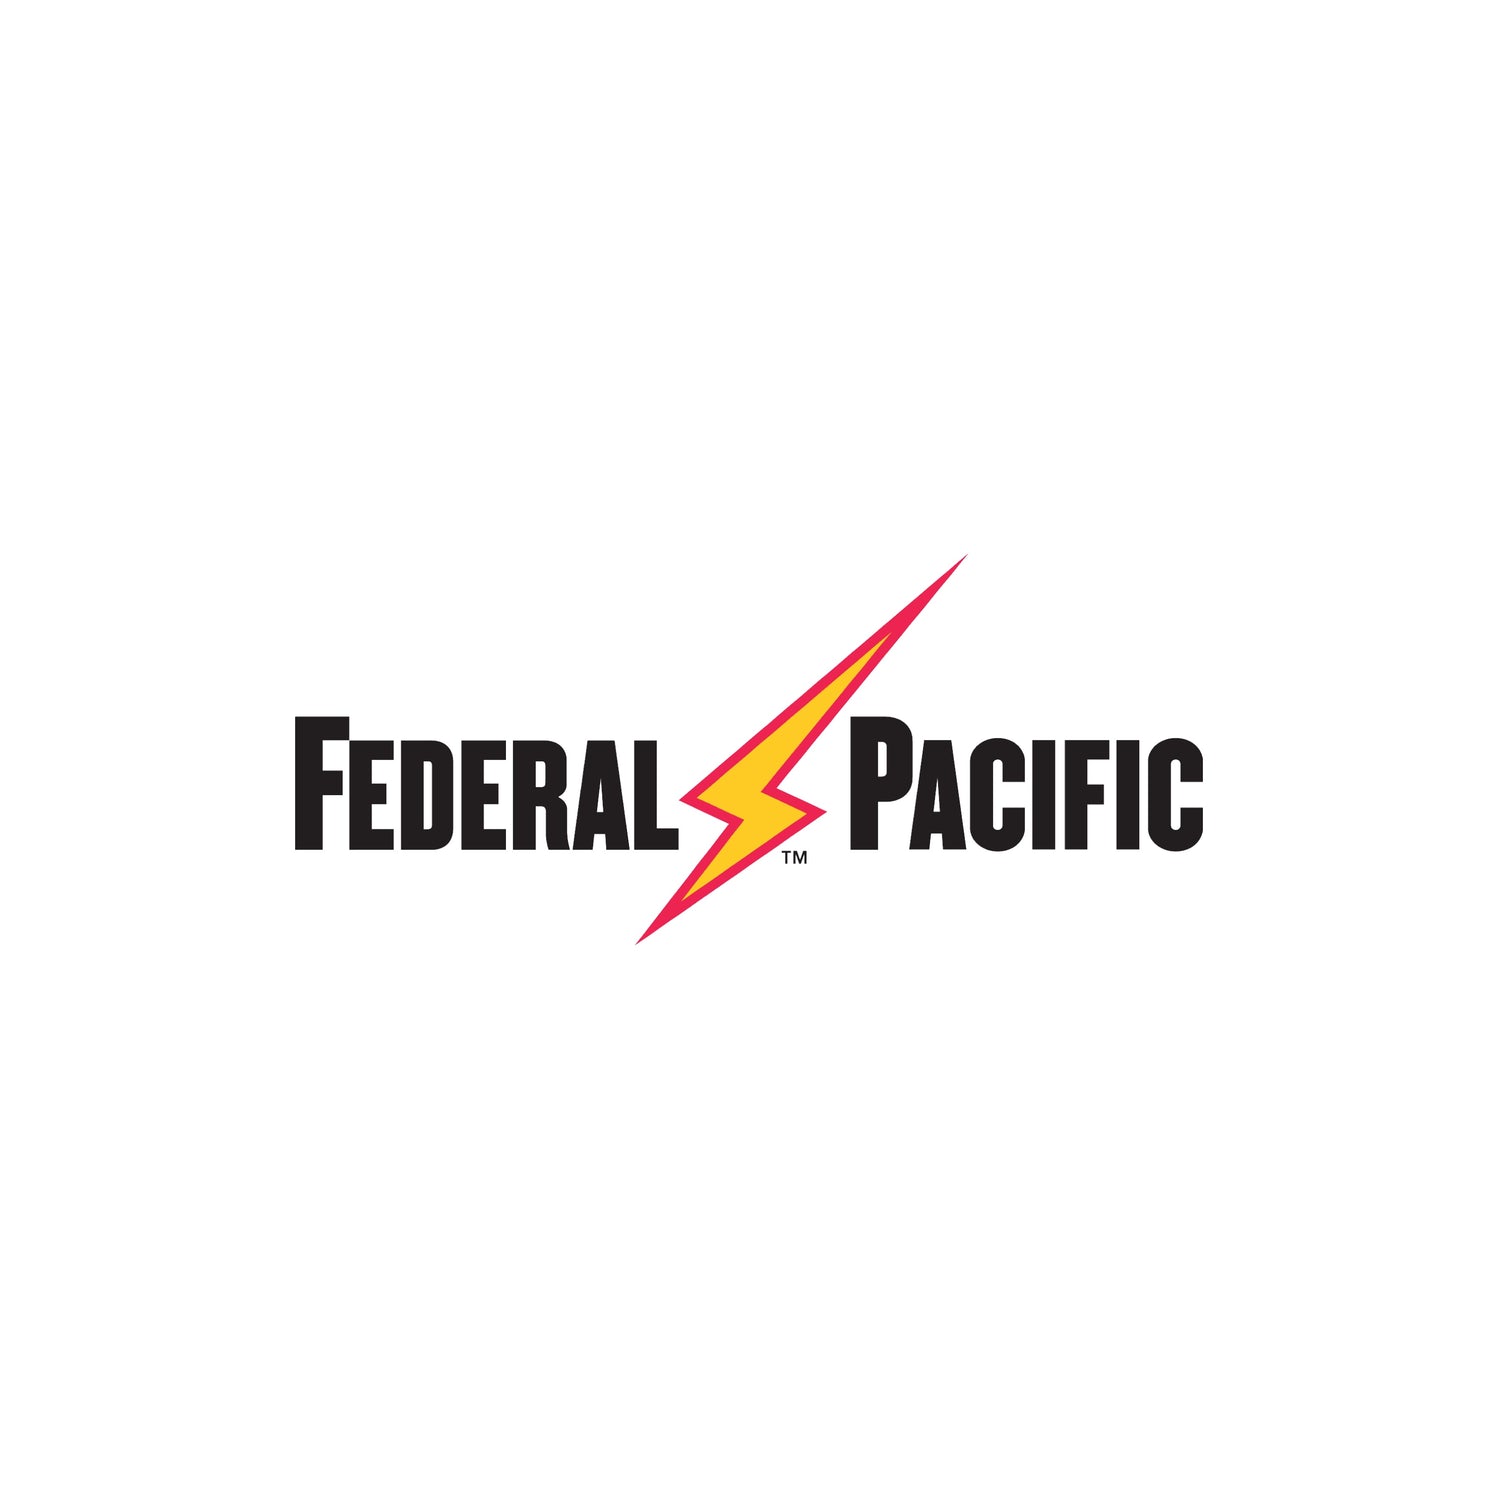 FEDERAL PACIFIC